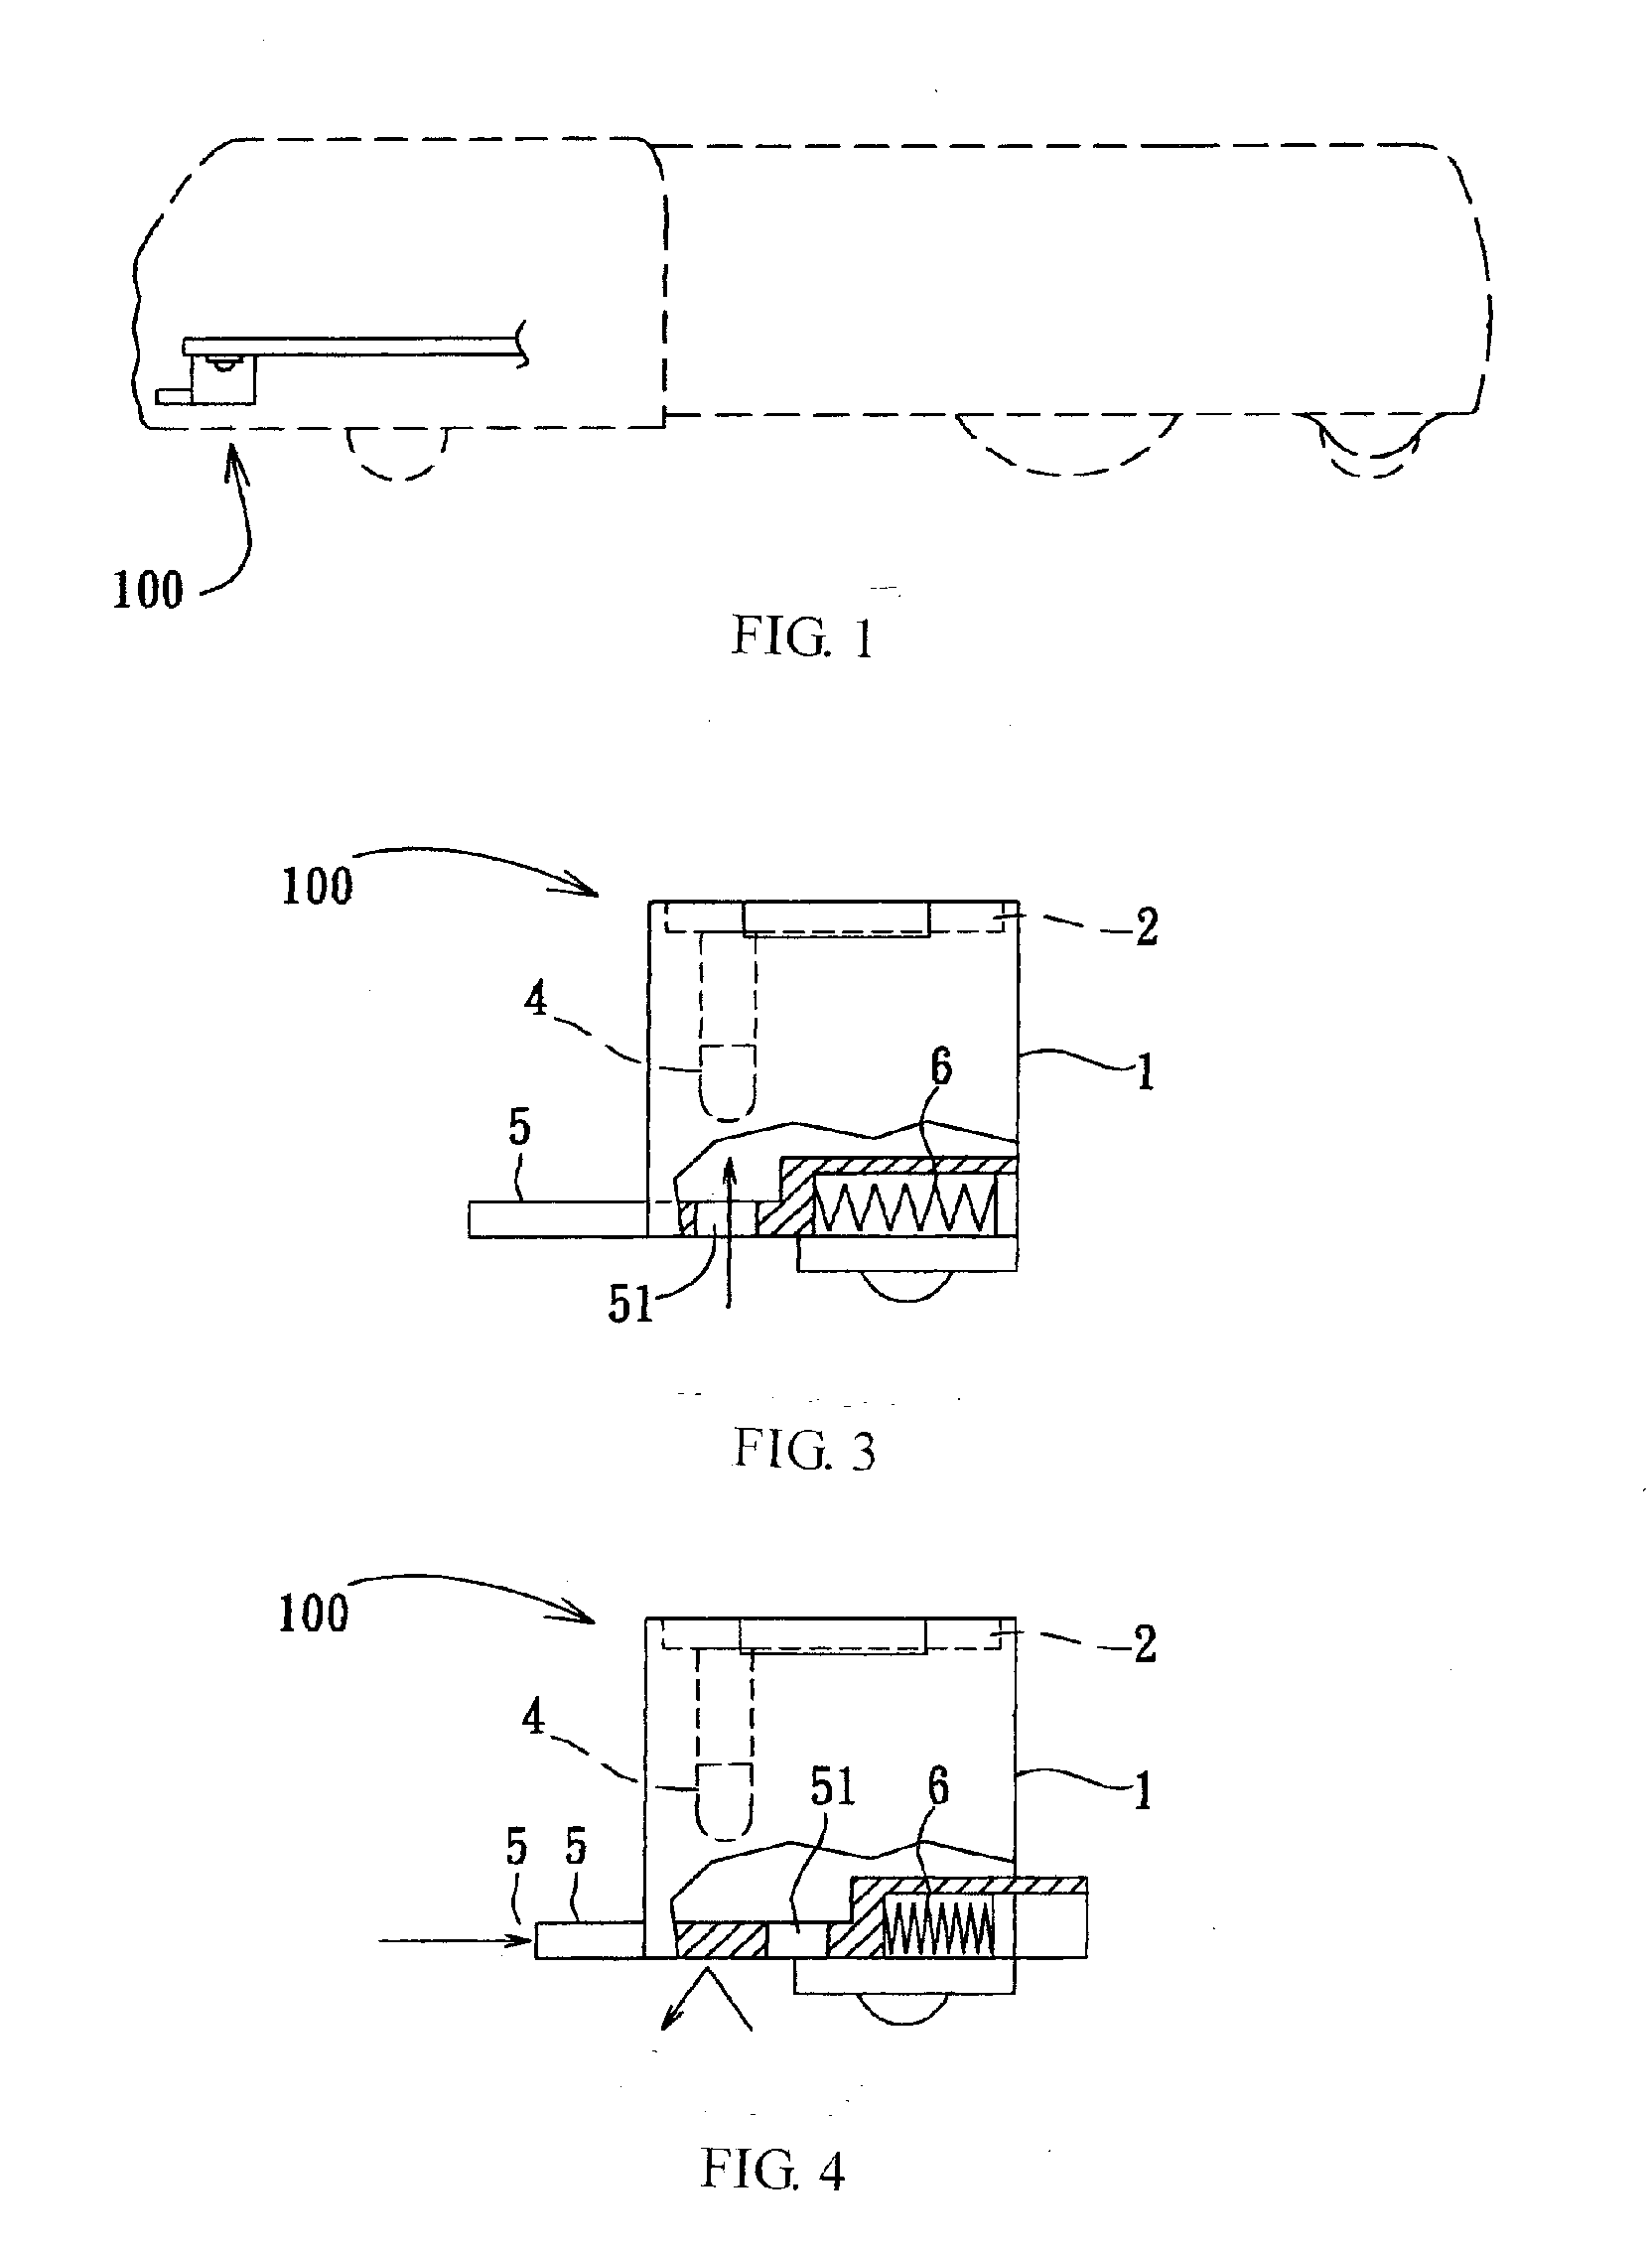 Steering control sensor for an automatic vacuum cleaner